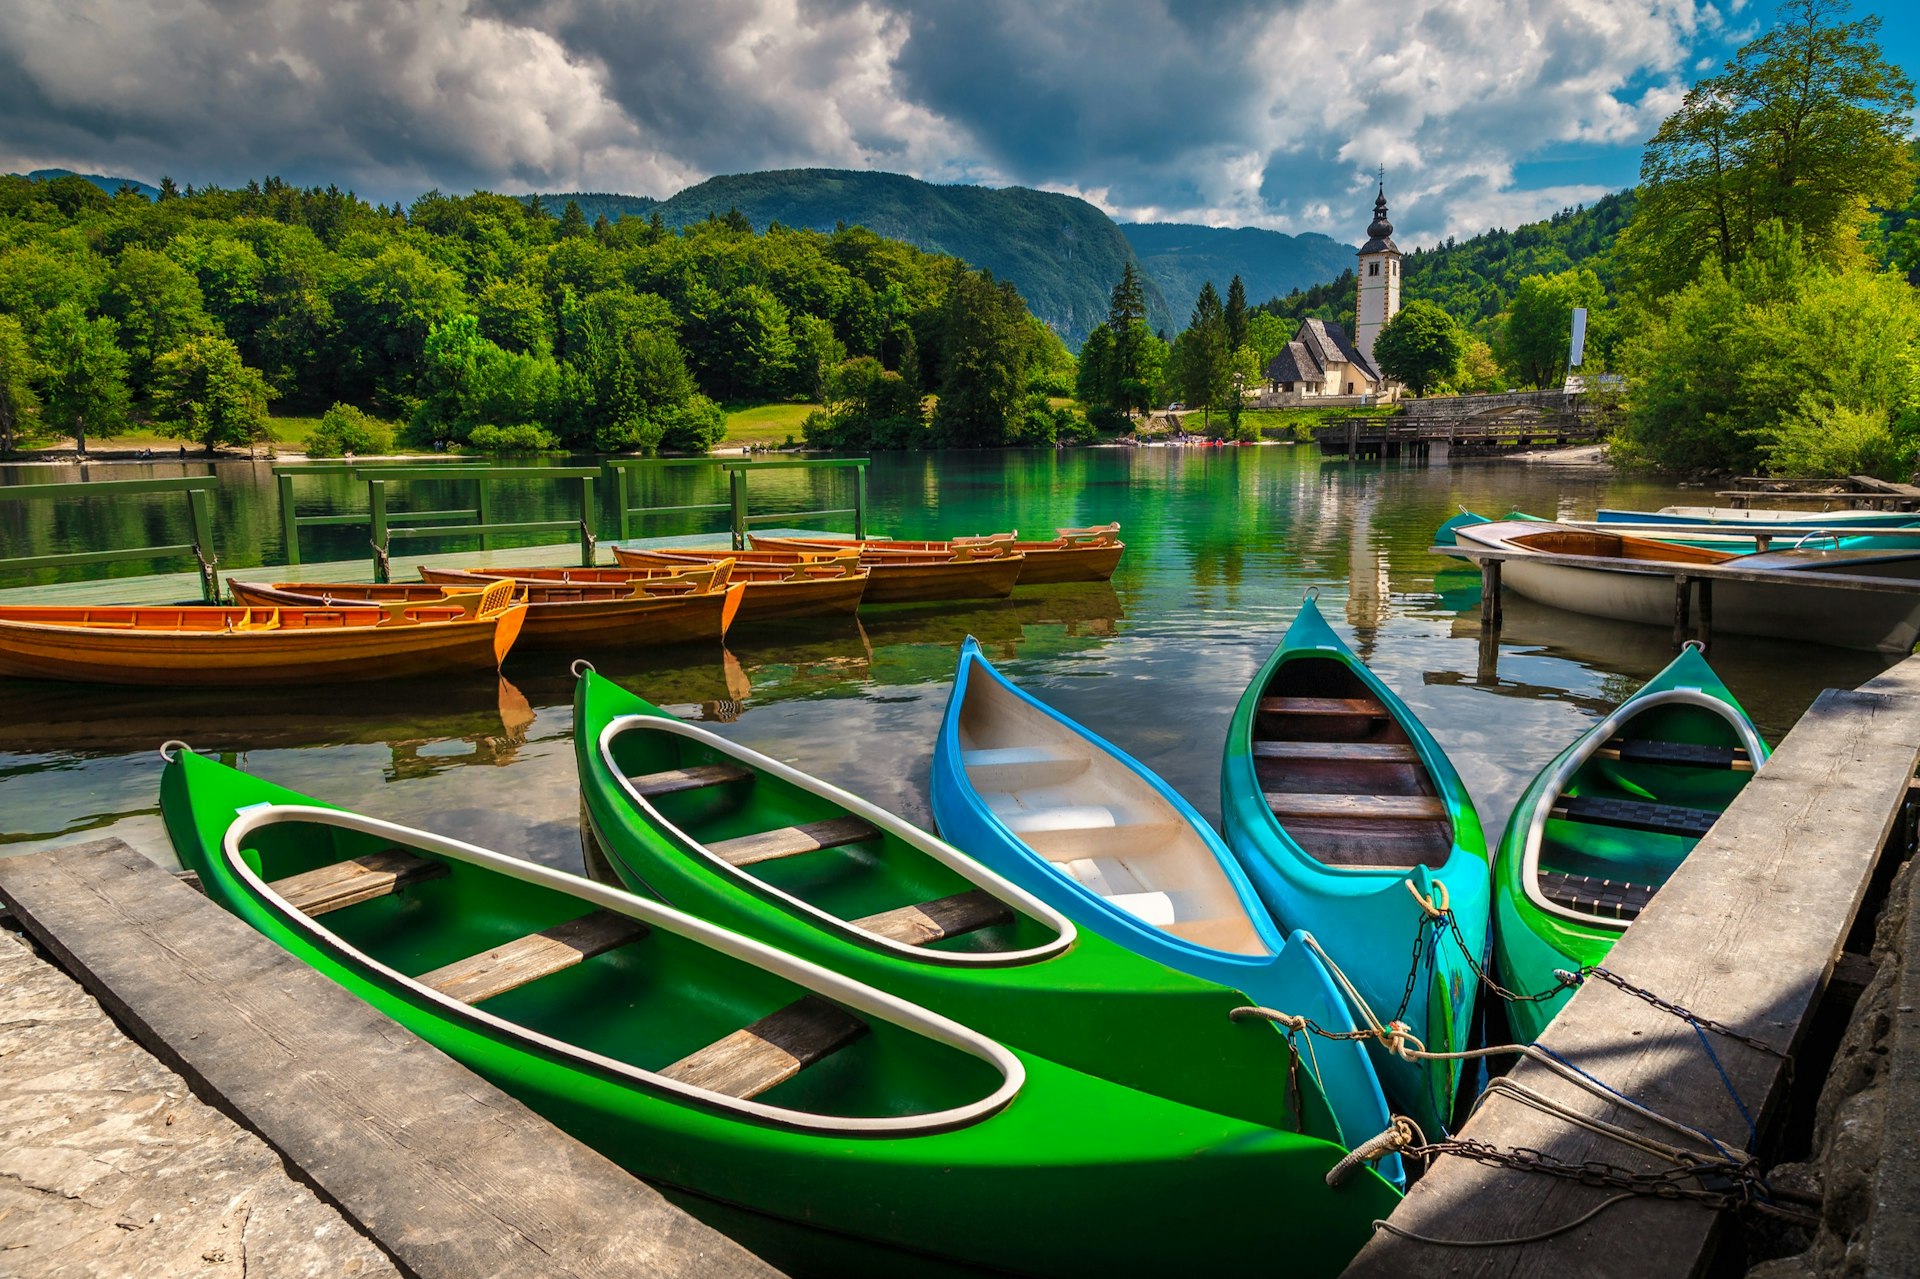 Anchored,Colorful,Canoes,,Kayaks,And,Wooden,Boats,On,The,Lake.